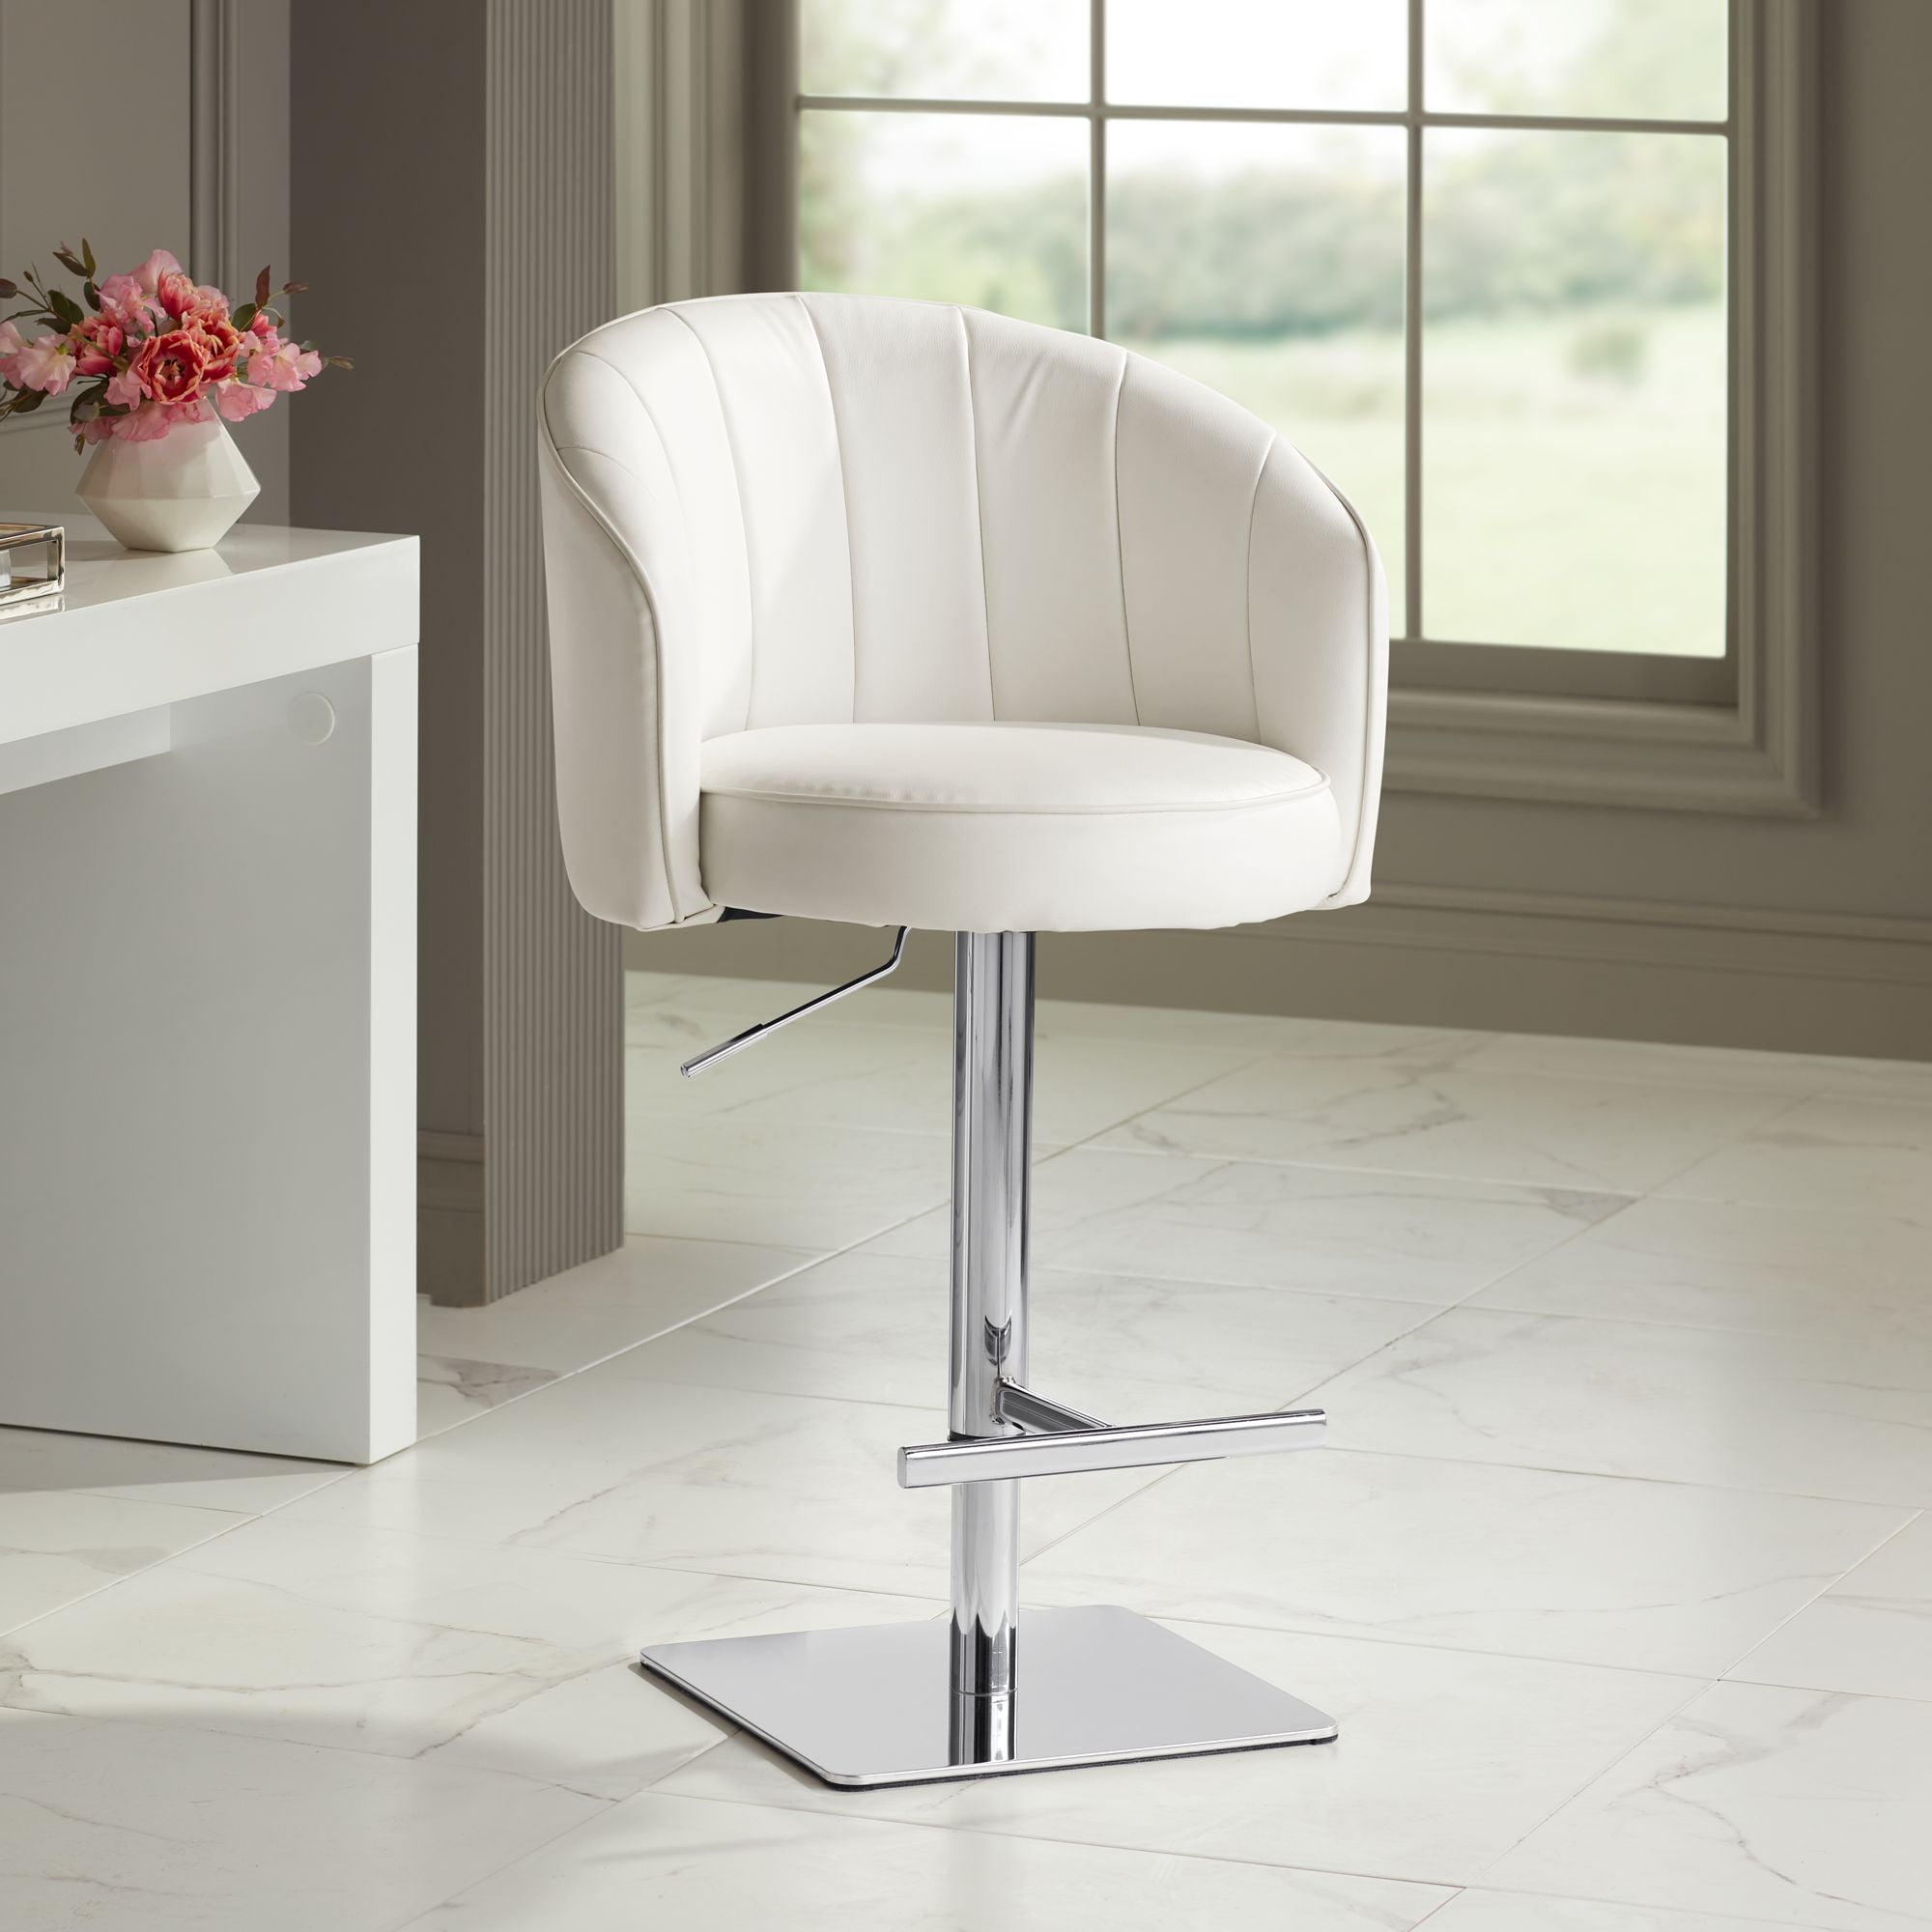 1 Chair, White Tuff Concepts High Back Breakfast Bar Stools Faux Leather Kitchen Swivel Stools 